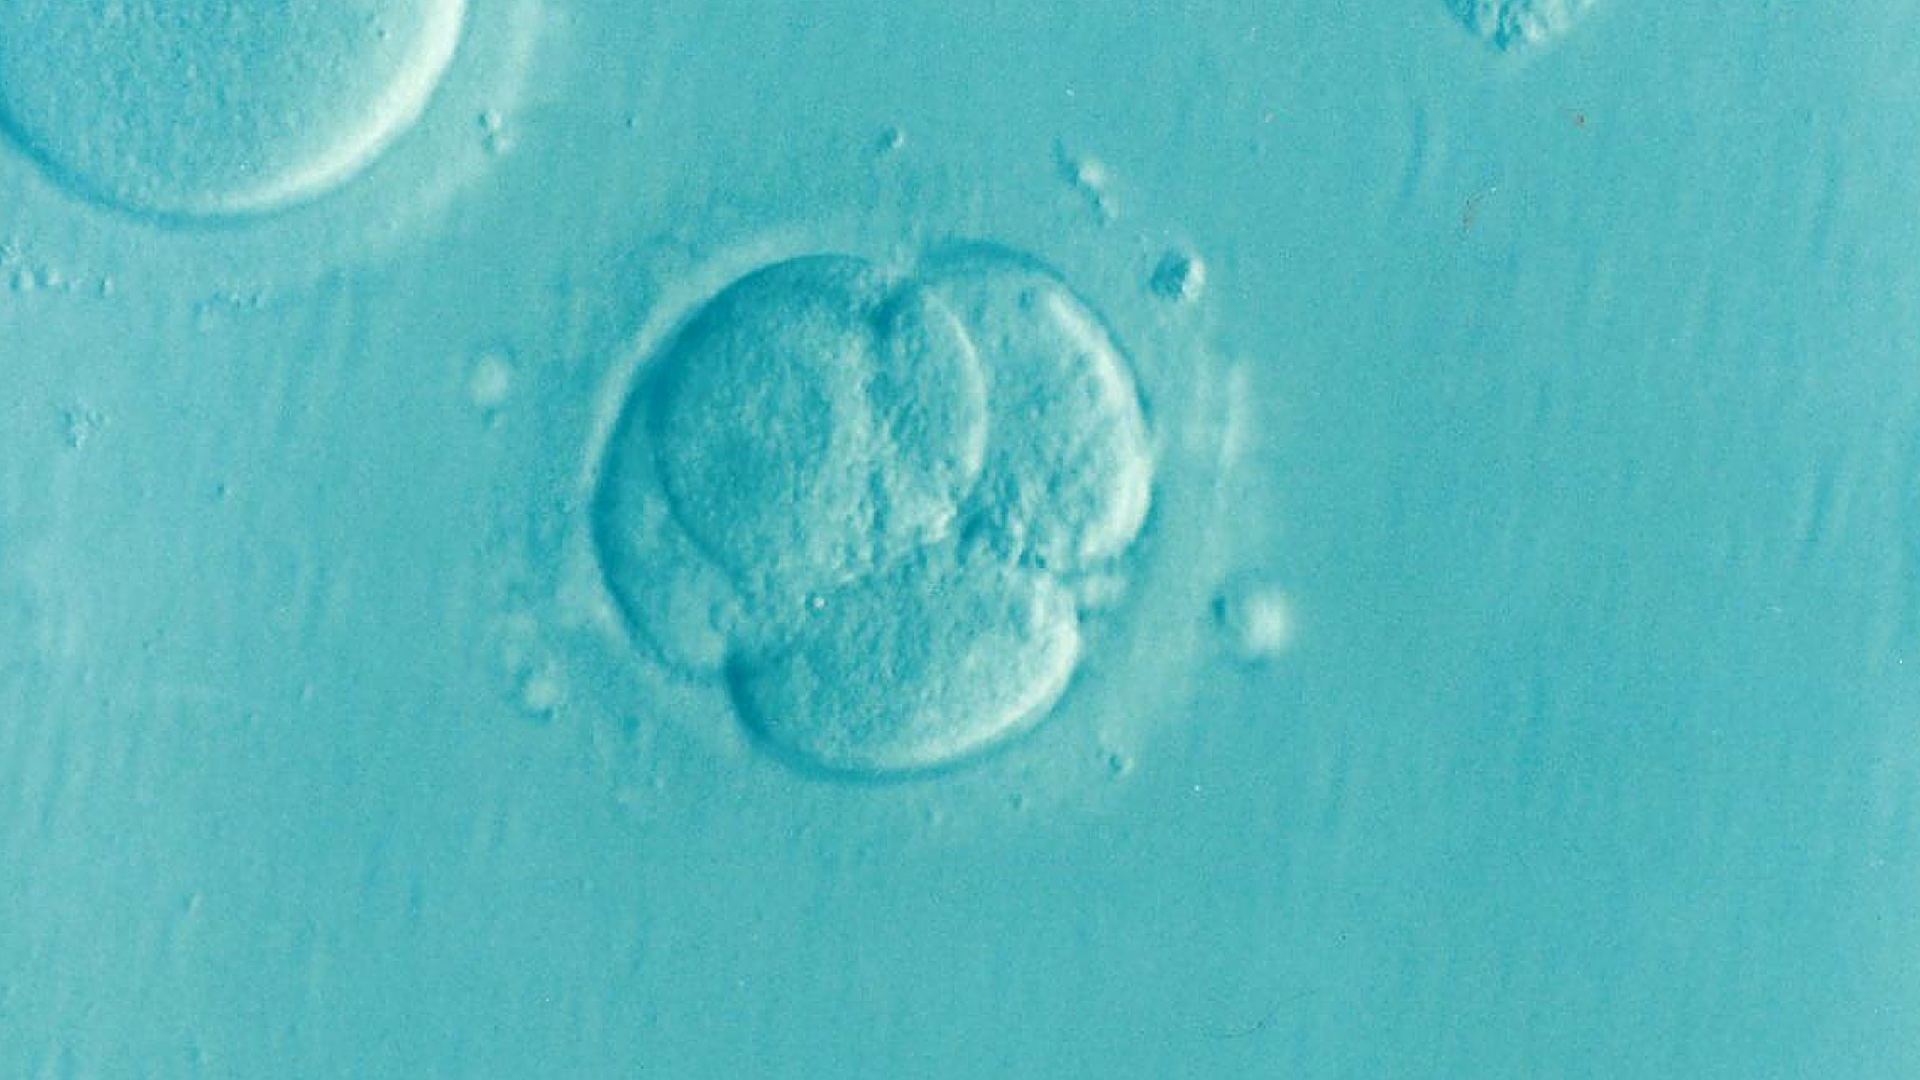 microscopic image of an early blastocyst: a four-cell staged embryo; whole image is cyan